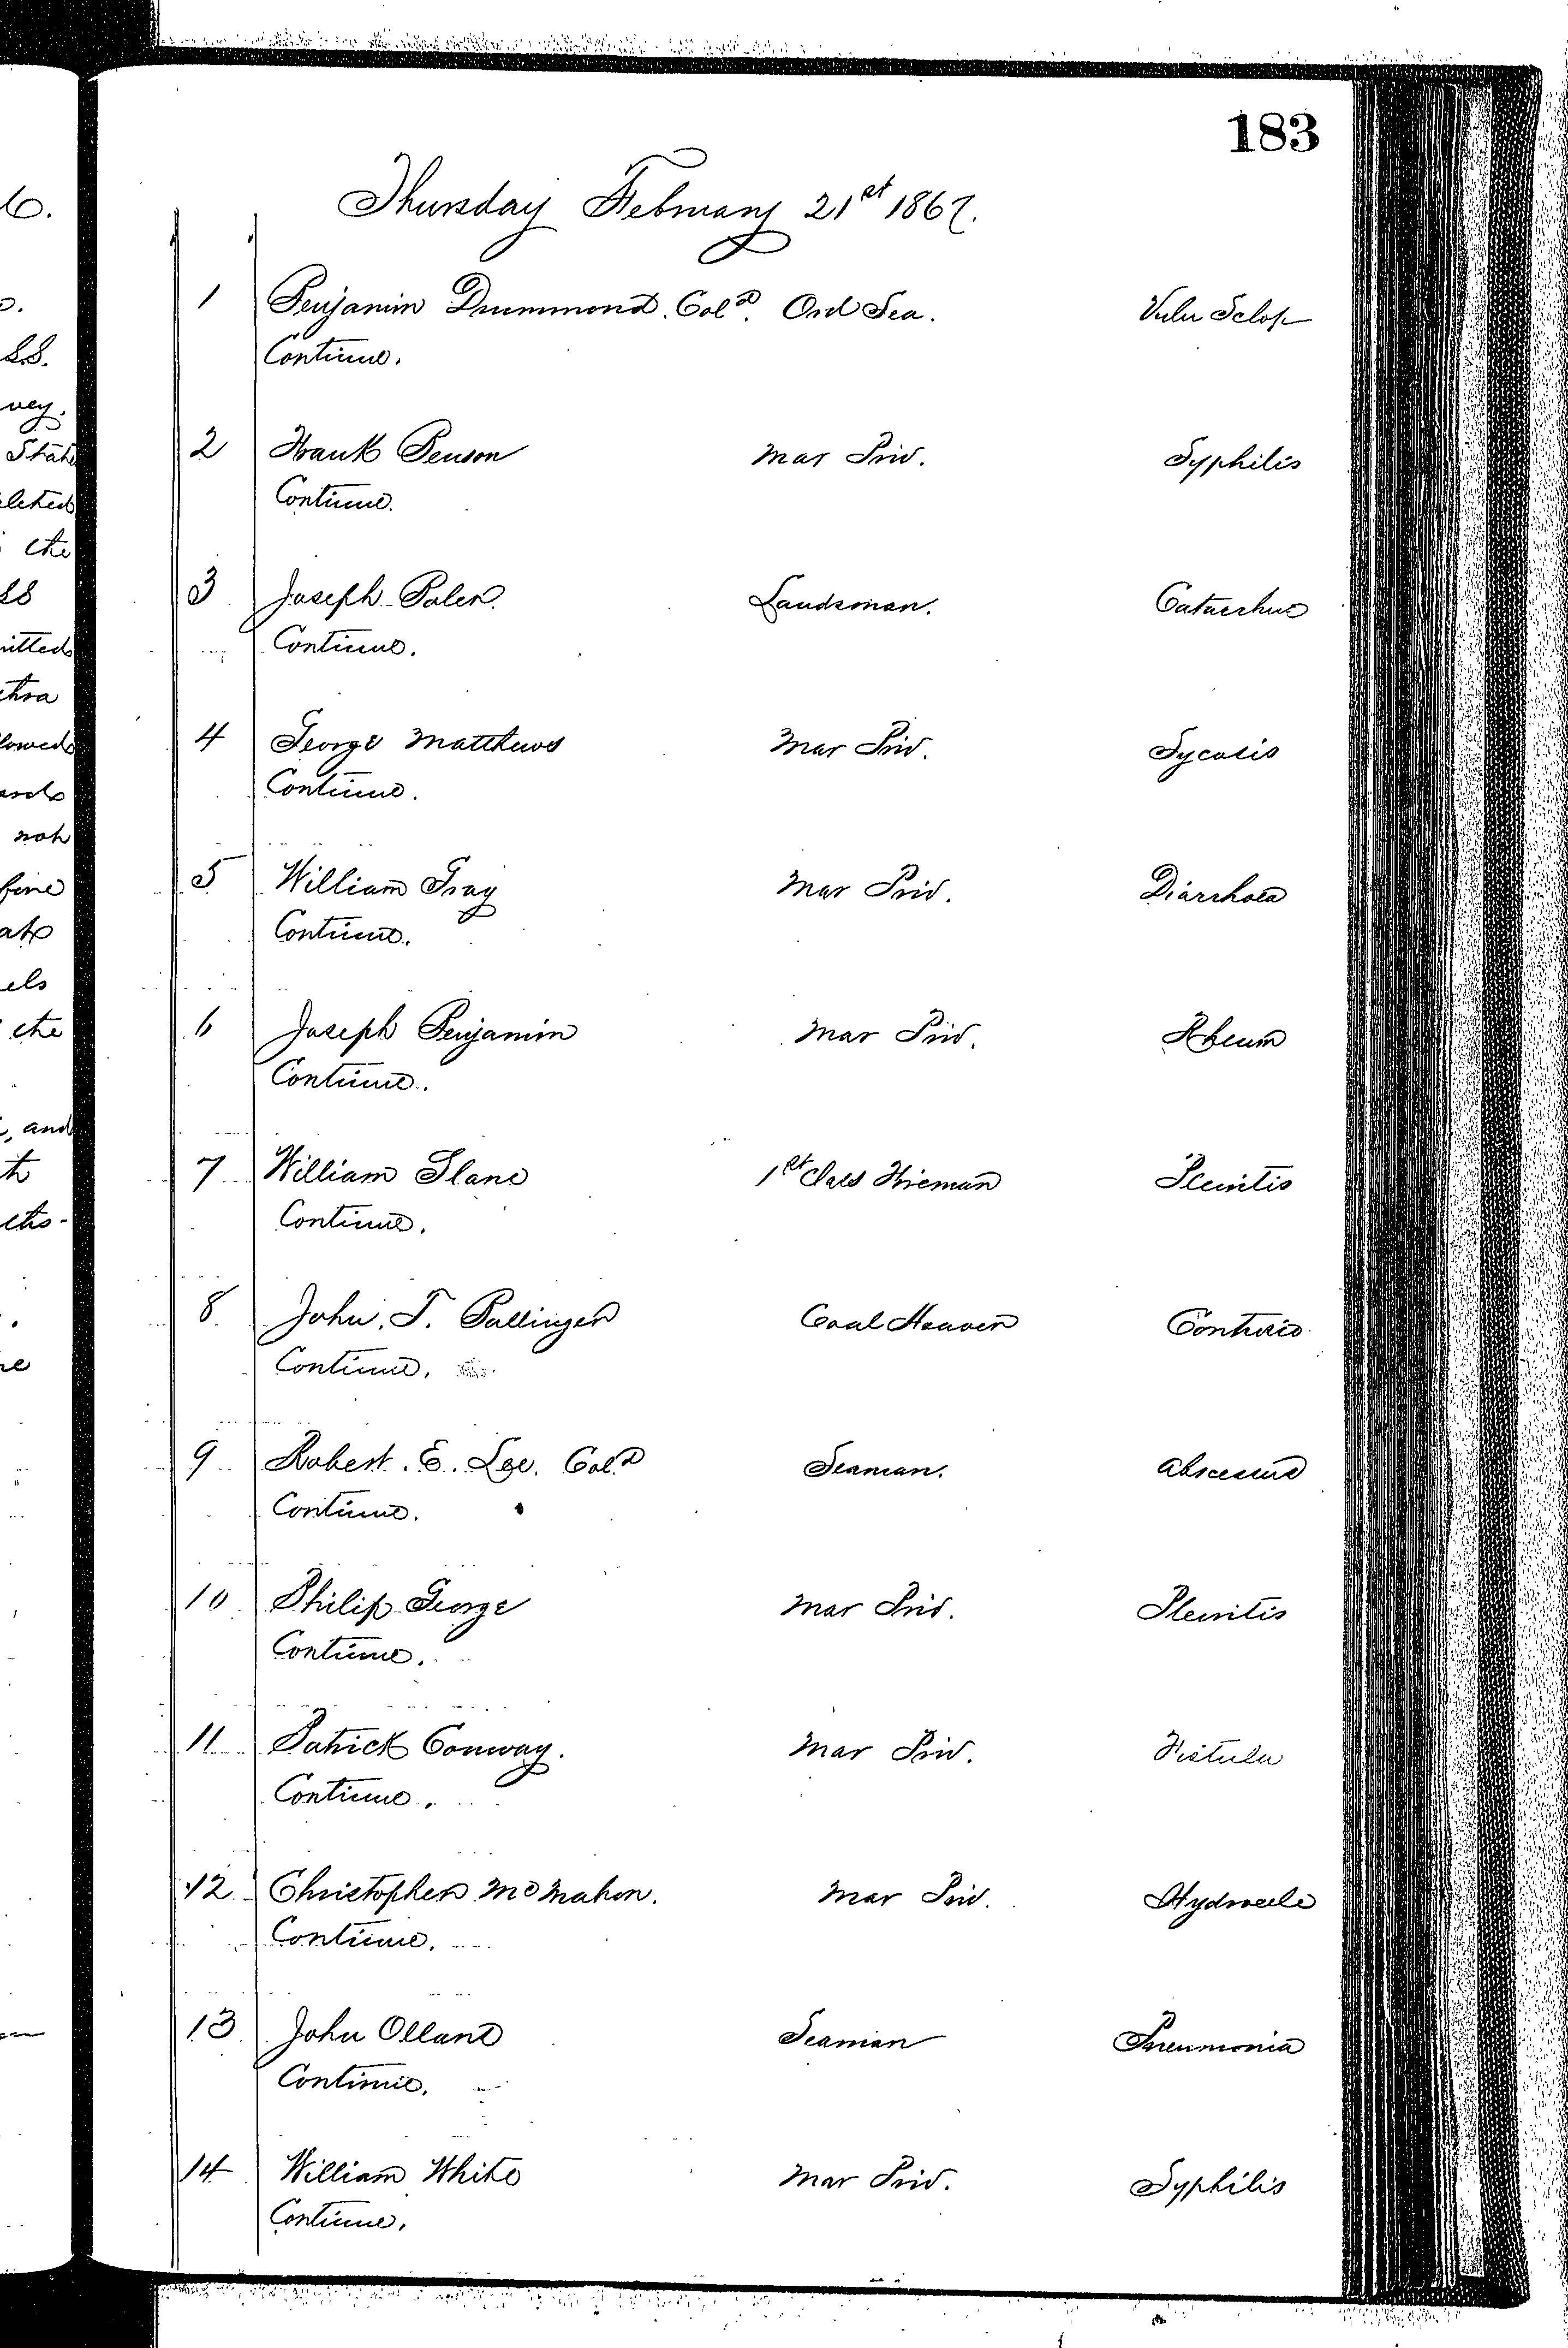 Patients in the Naval Hospital, Washington DC, on February 21, 1867 - Page 1 of 4, in the Medical Journal, October 1, 1866 to March 20, 1867